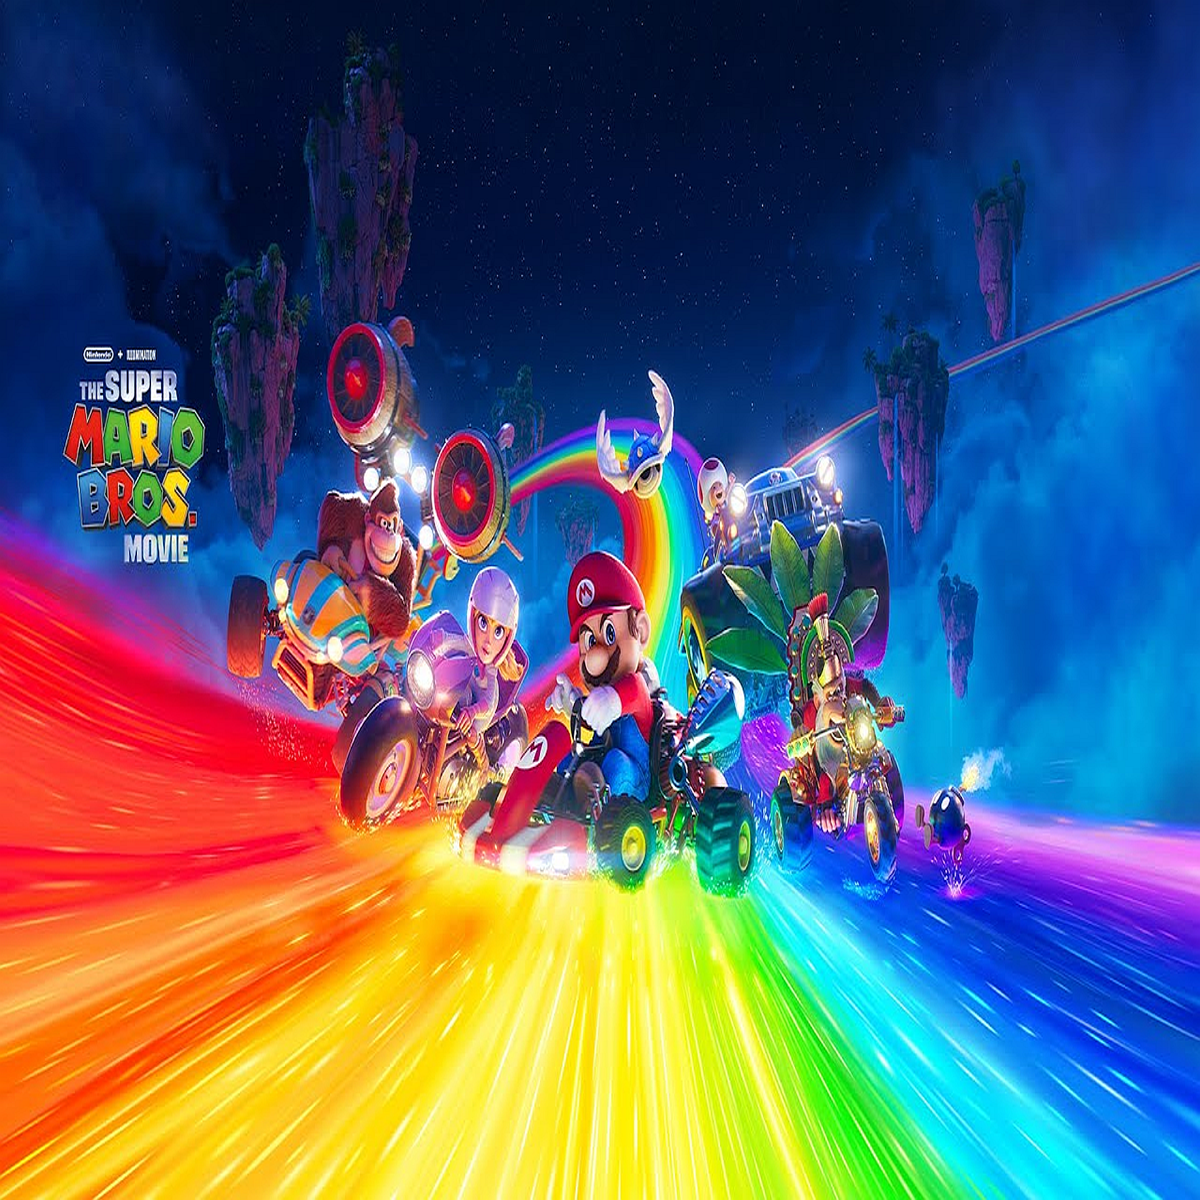 The Super Mario Bros. Movie on X: Let's get the show on the 🌈 road  #SuperMarioMovie  / X